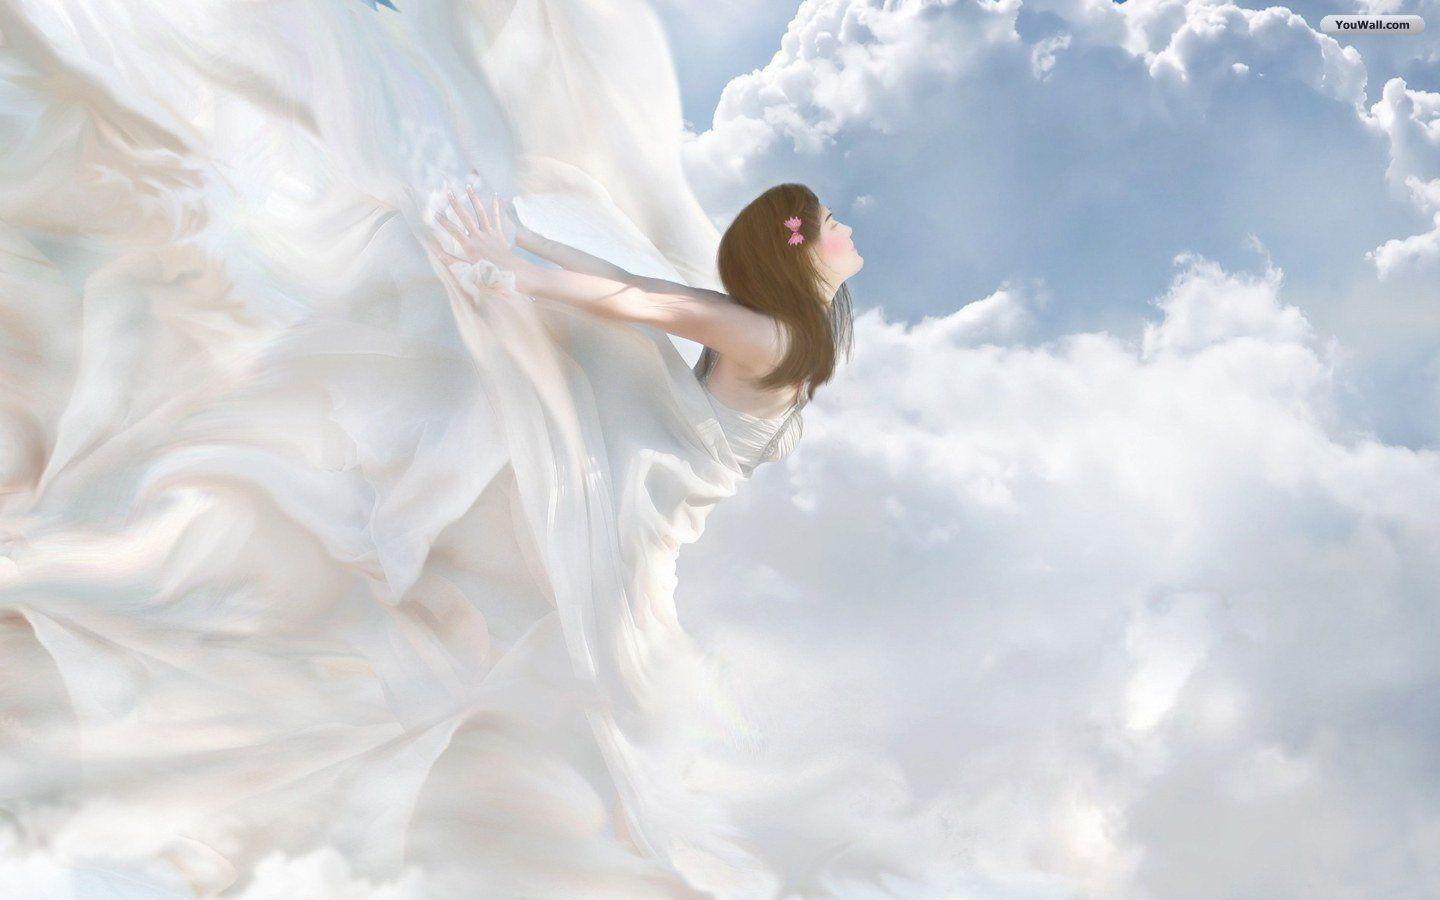 Angel Picture, Image, Photo. Angel picture, Angel wallpaper, Angel image